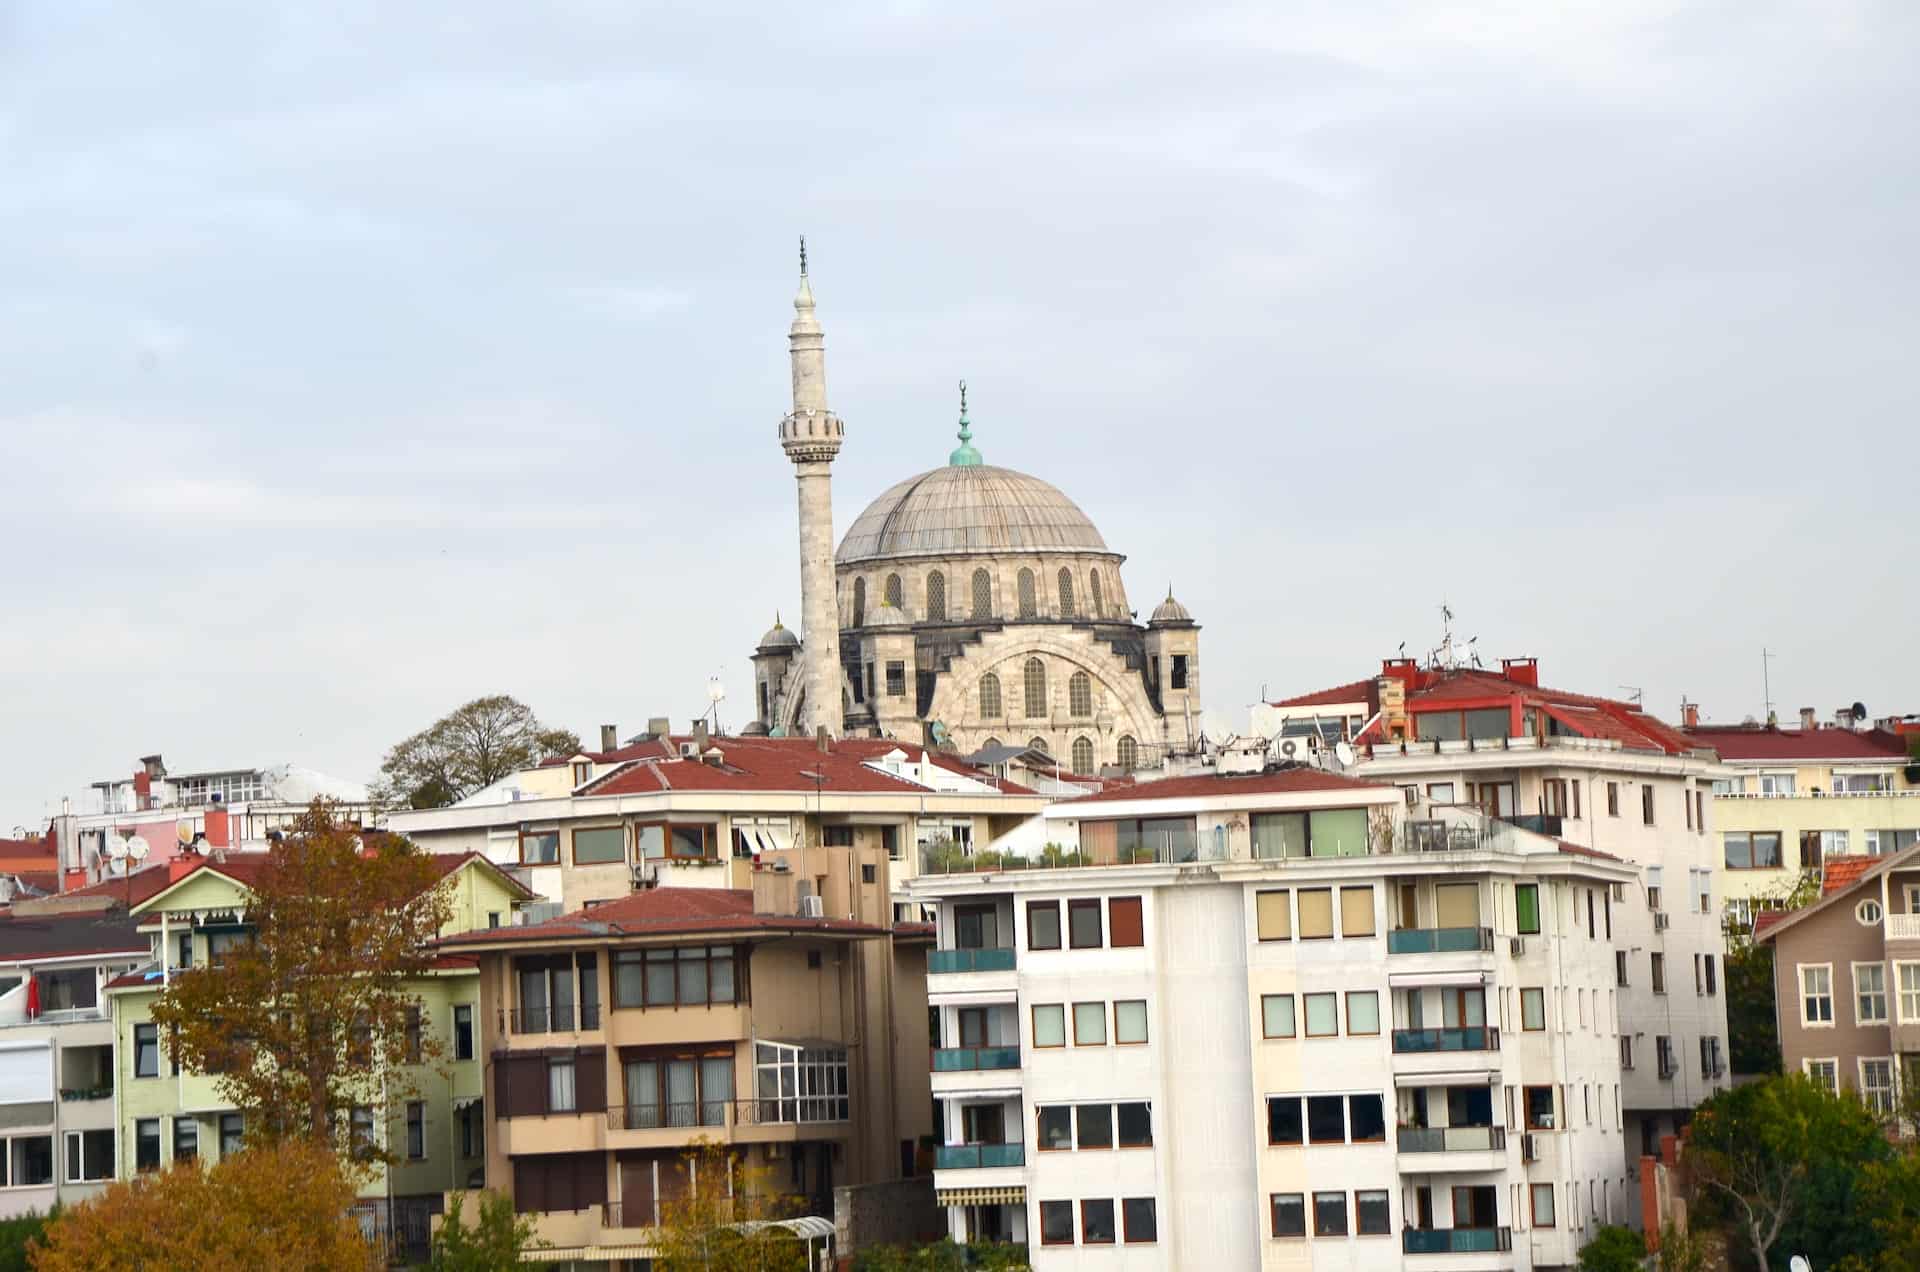 Looking at the Ayazma Mosque from the Bosporus